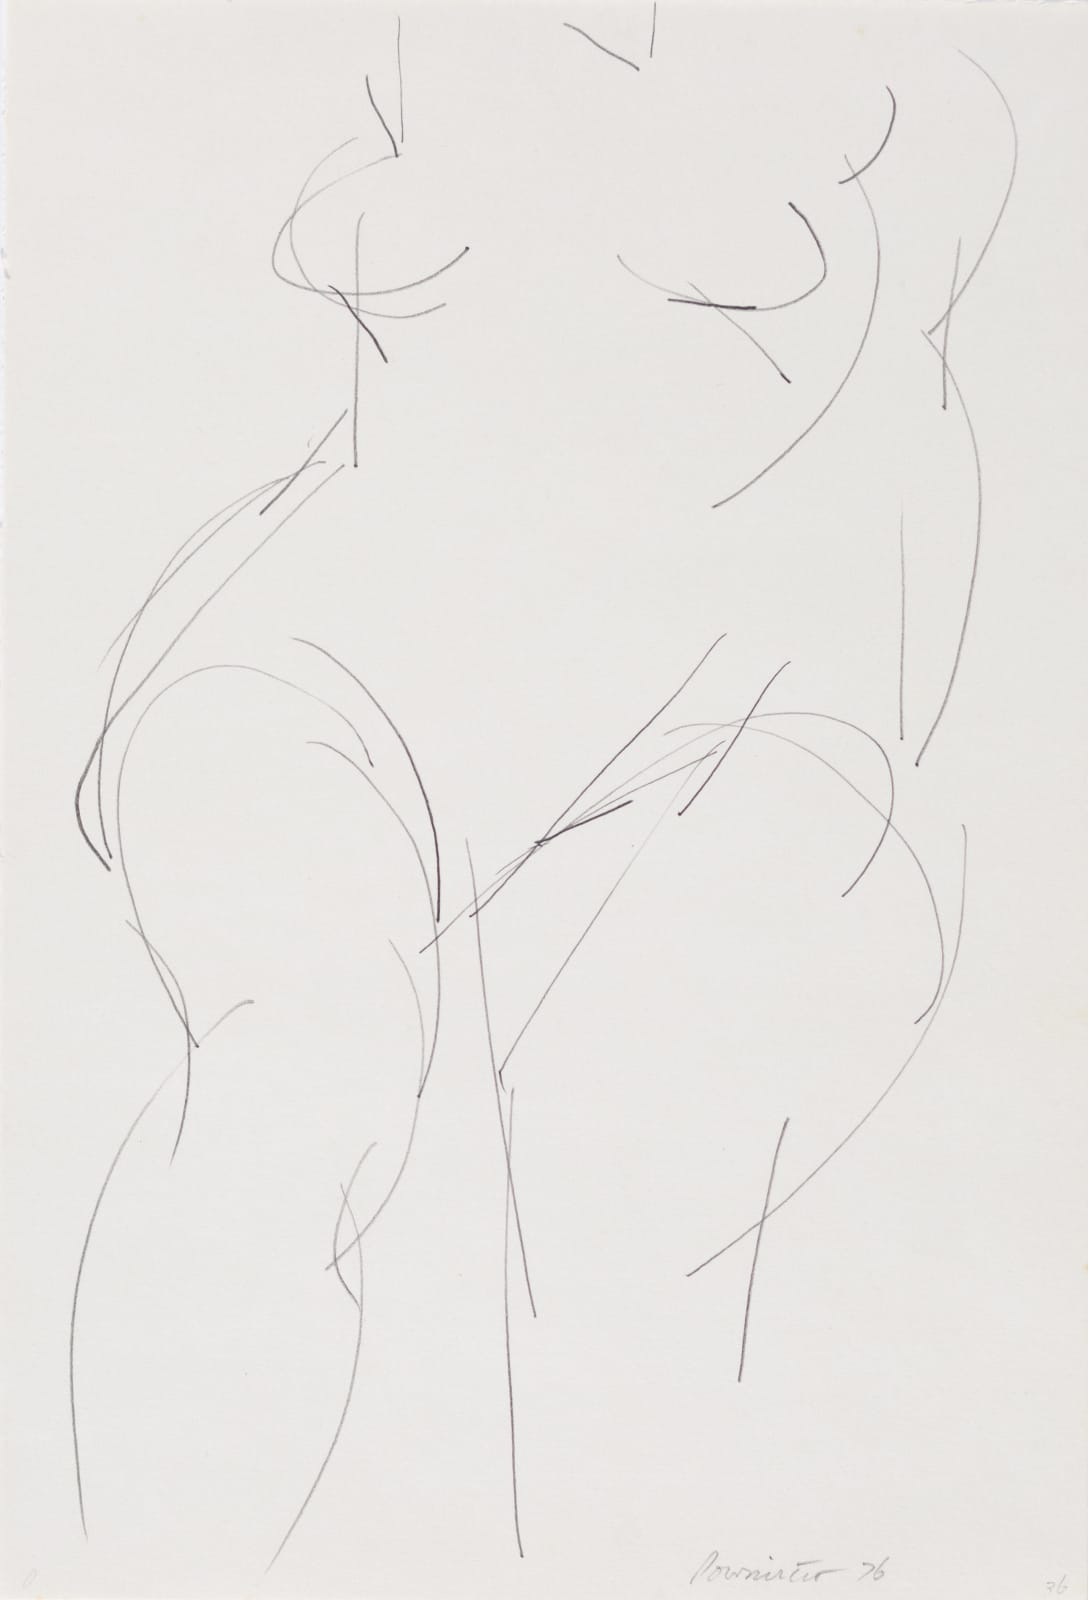 Estate of Peter Powditch, Life Drawing 56, 1976